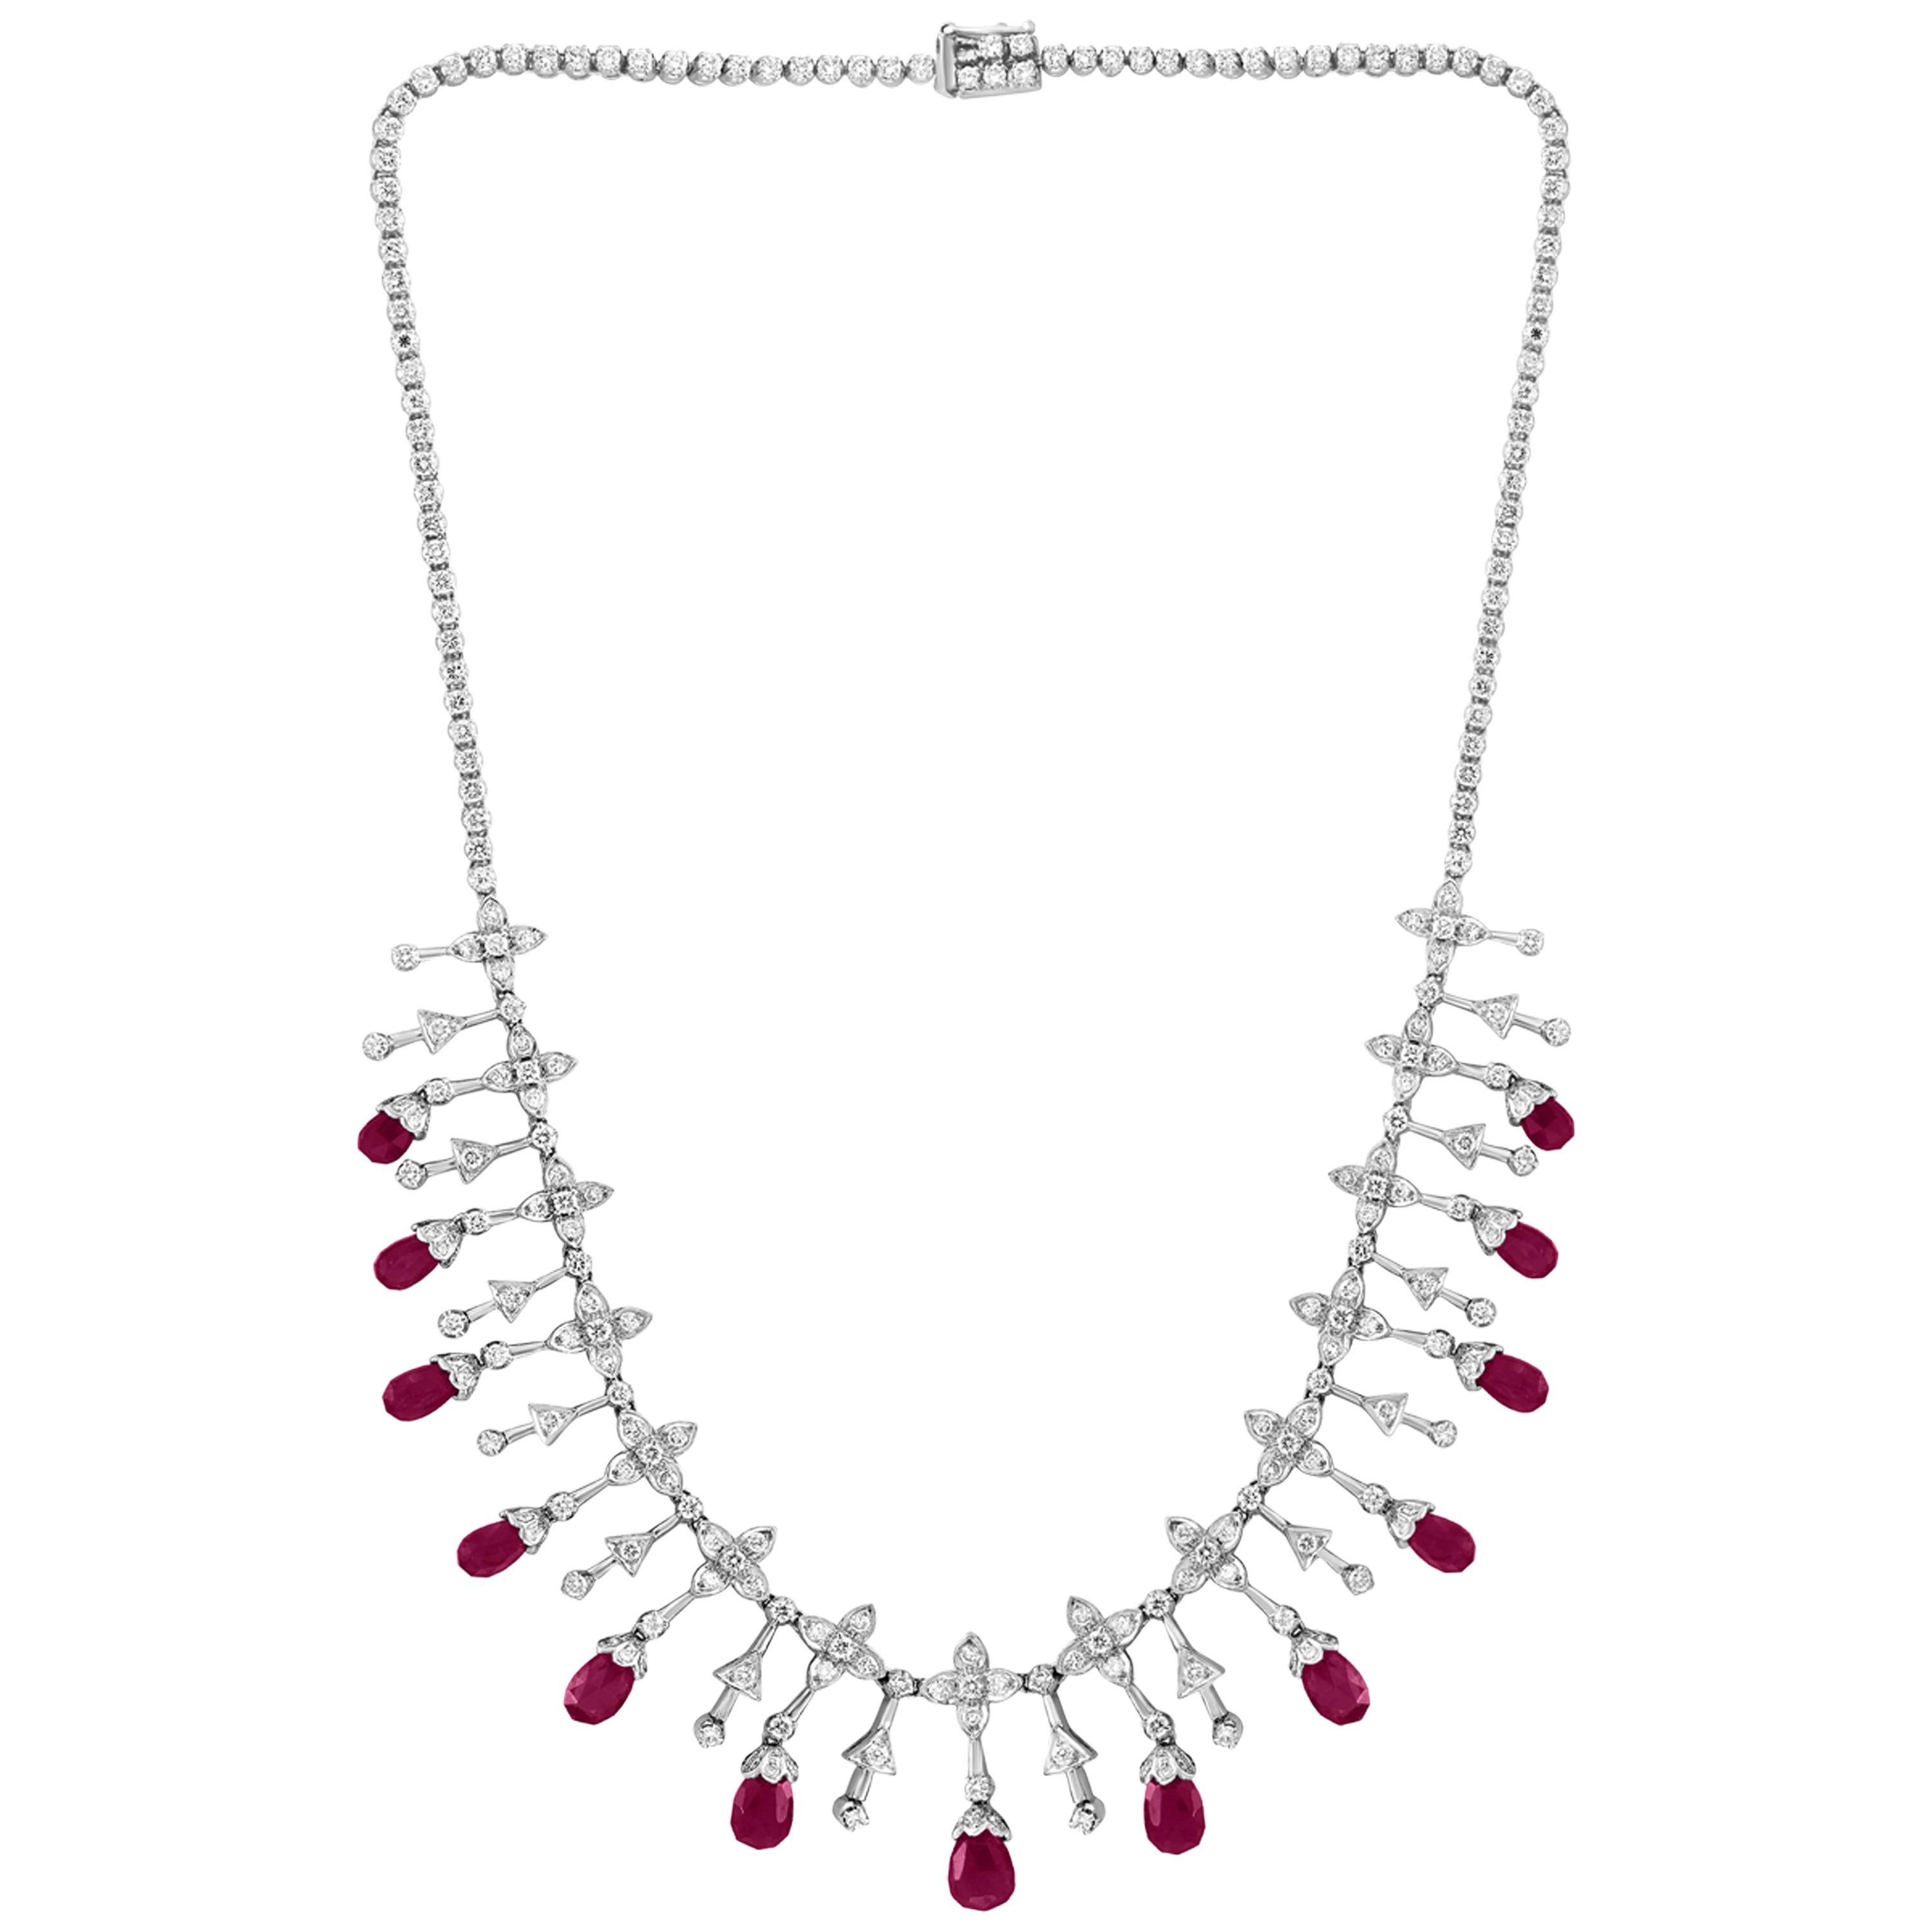 Natural Ruby Briolettes and Diamond Necklace 18 Karat White Gold, Estate